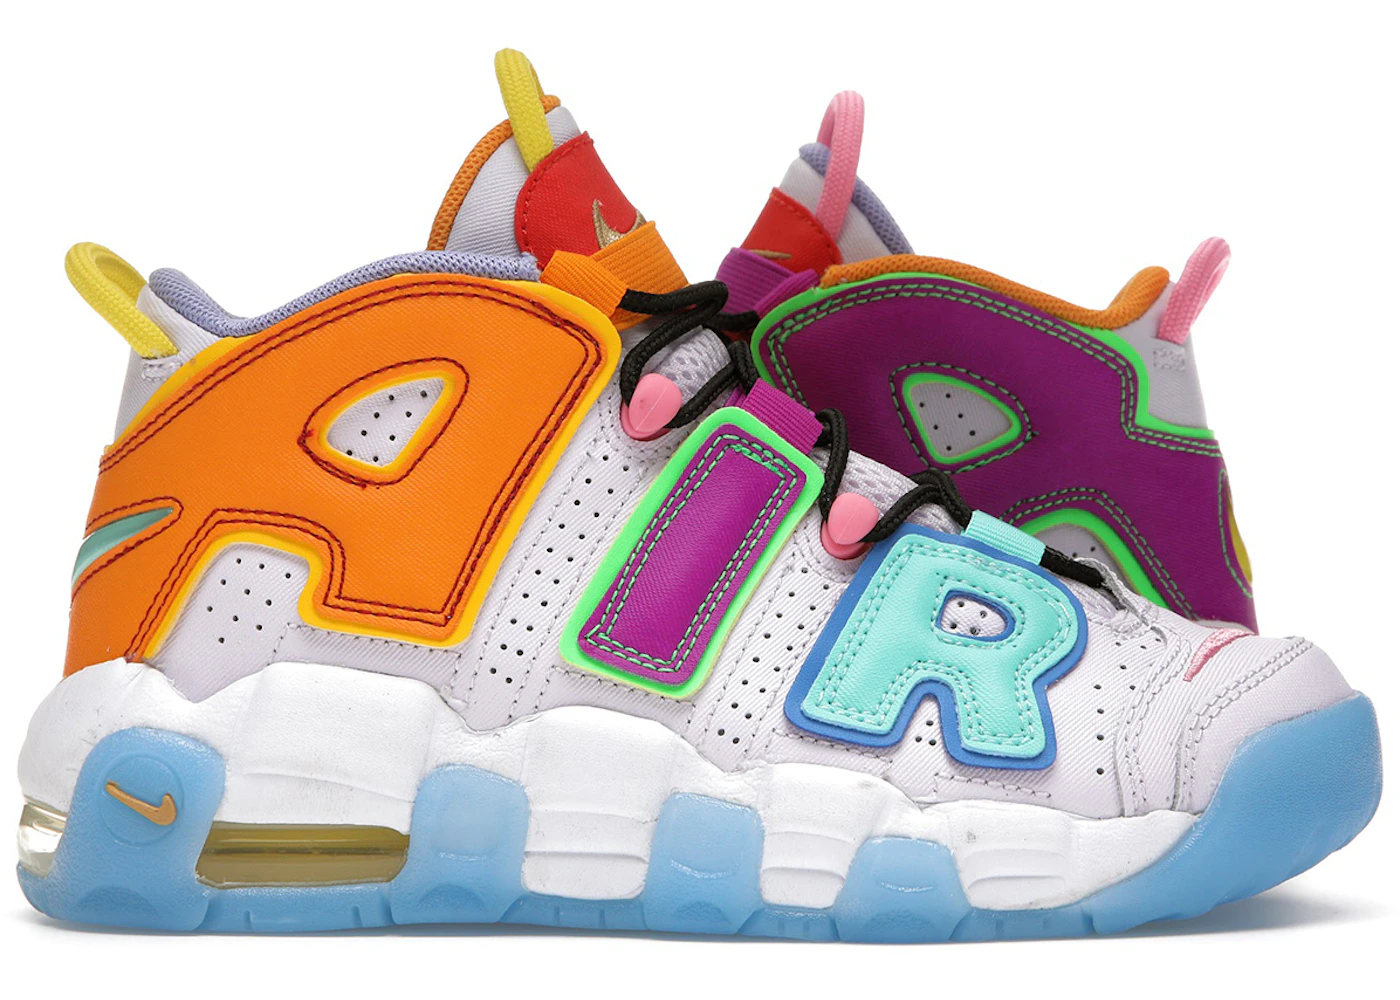 Monopoly Generous Both Nike Air More Uptempo Multi-Color (GS) Kids' - DH0624-500 - US